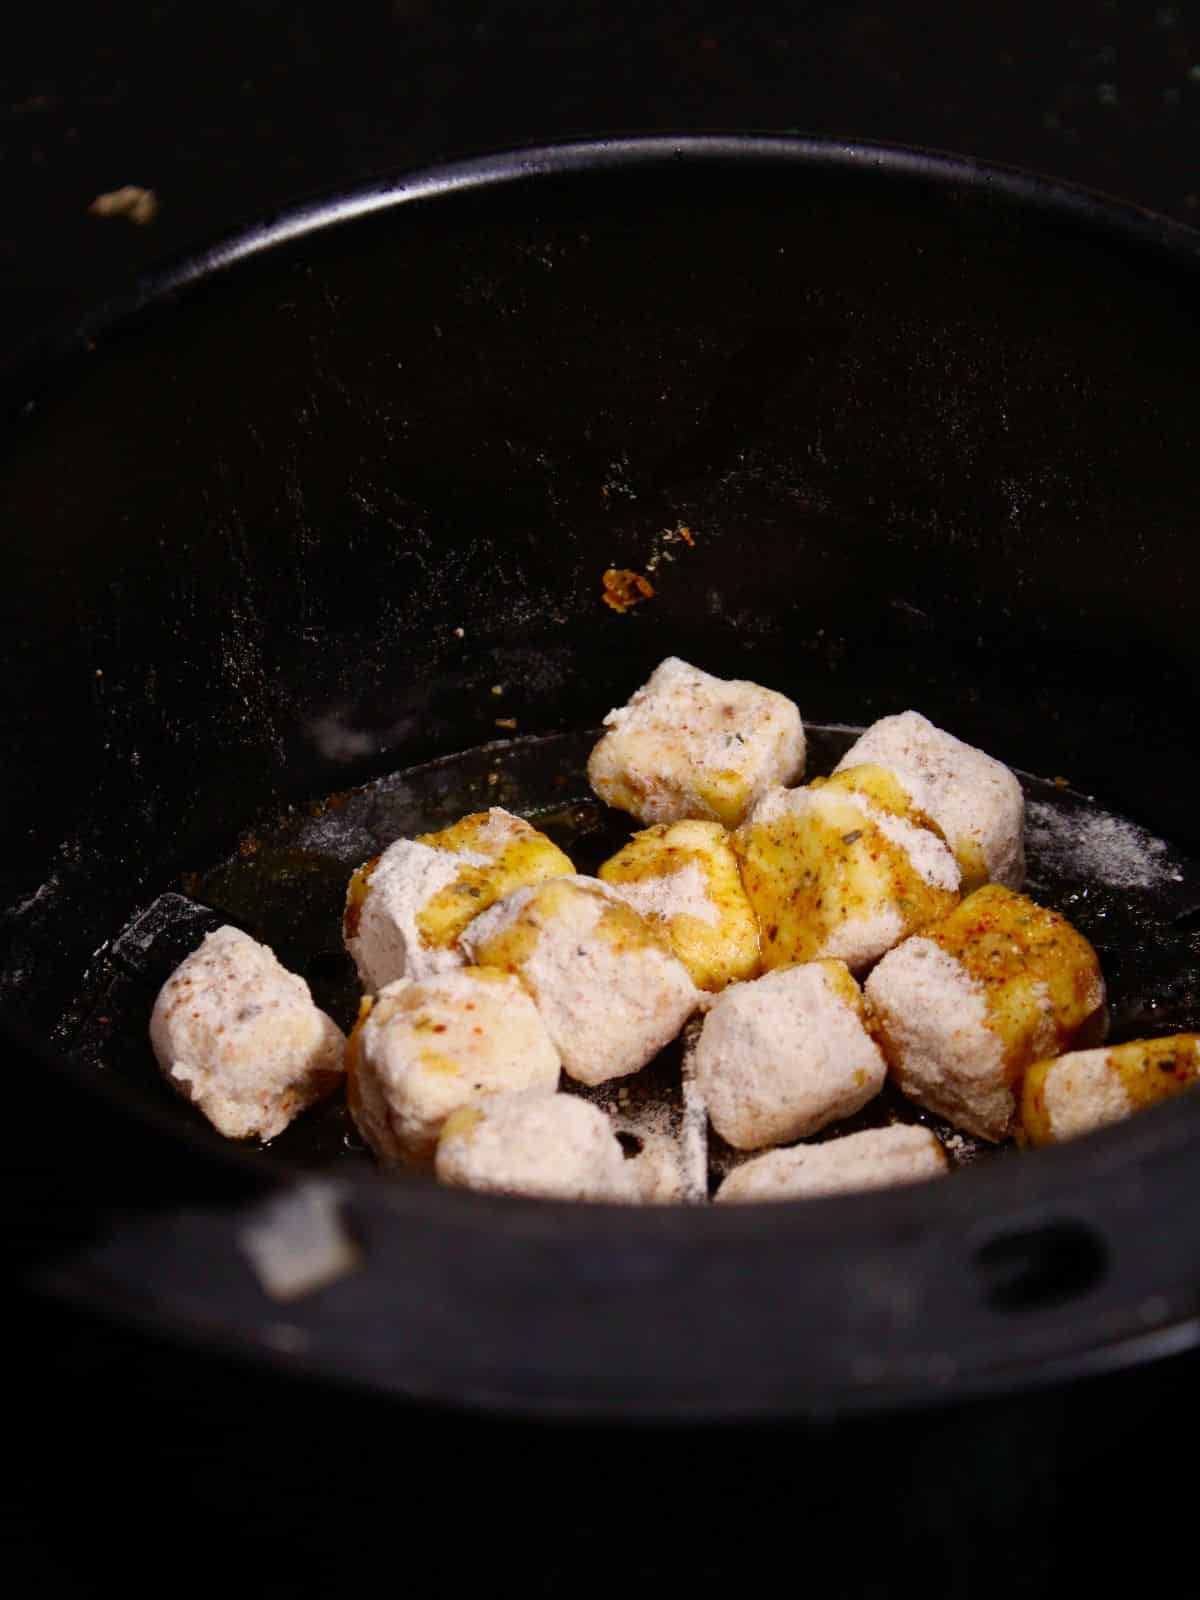 transfer the coated paneer into the air fryer and air fry it 